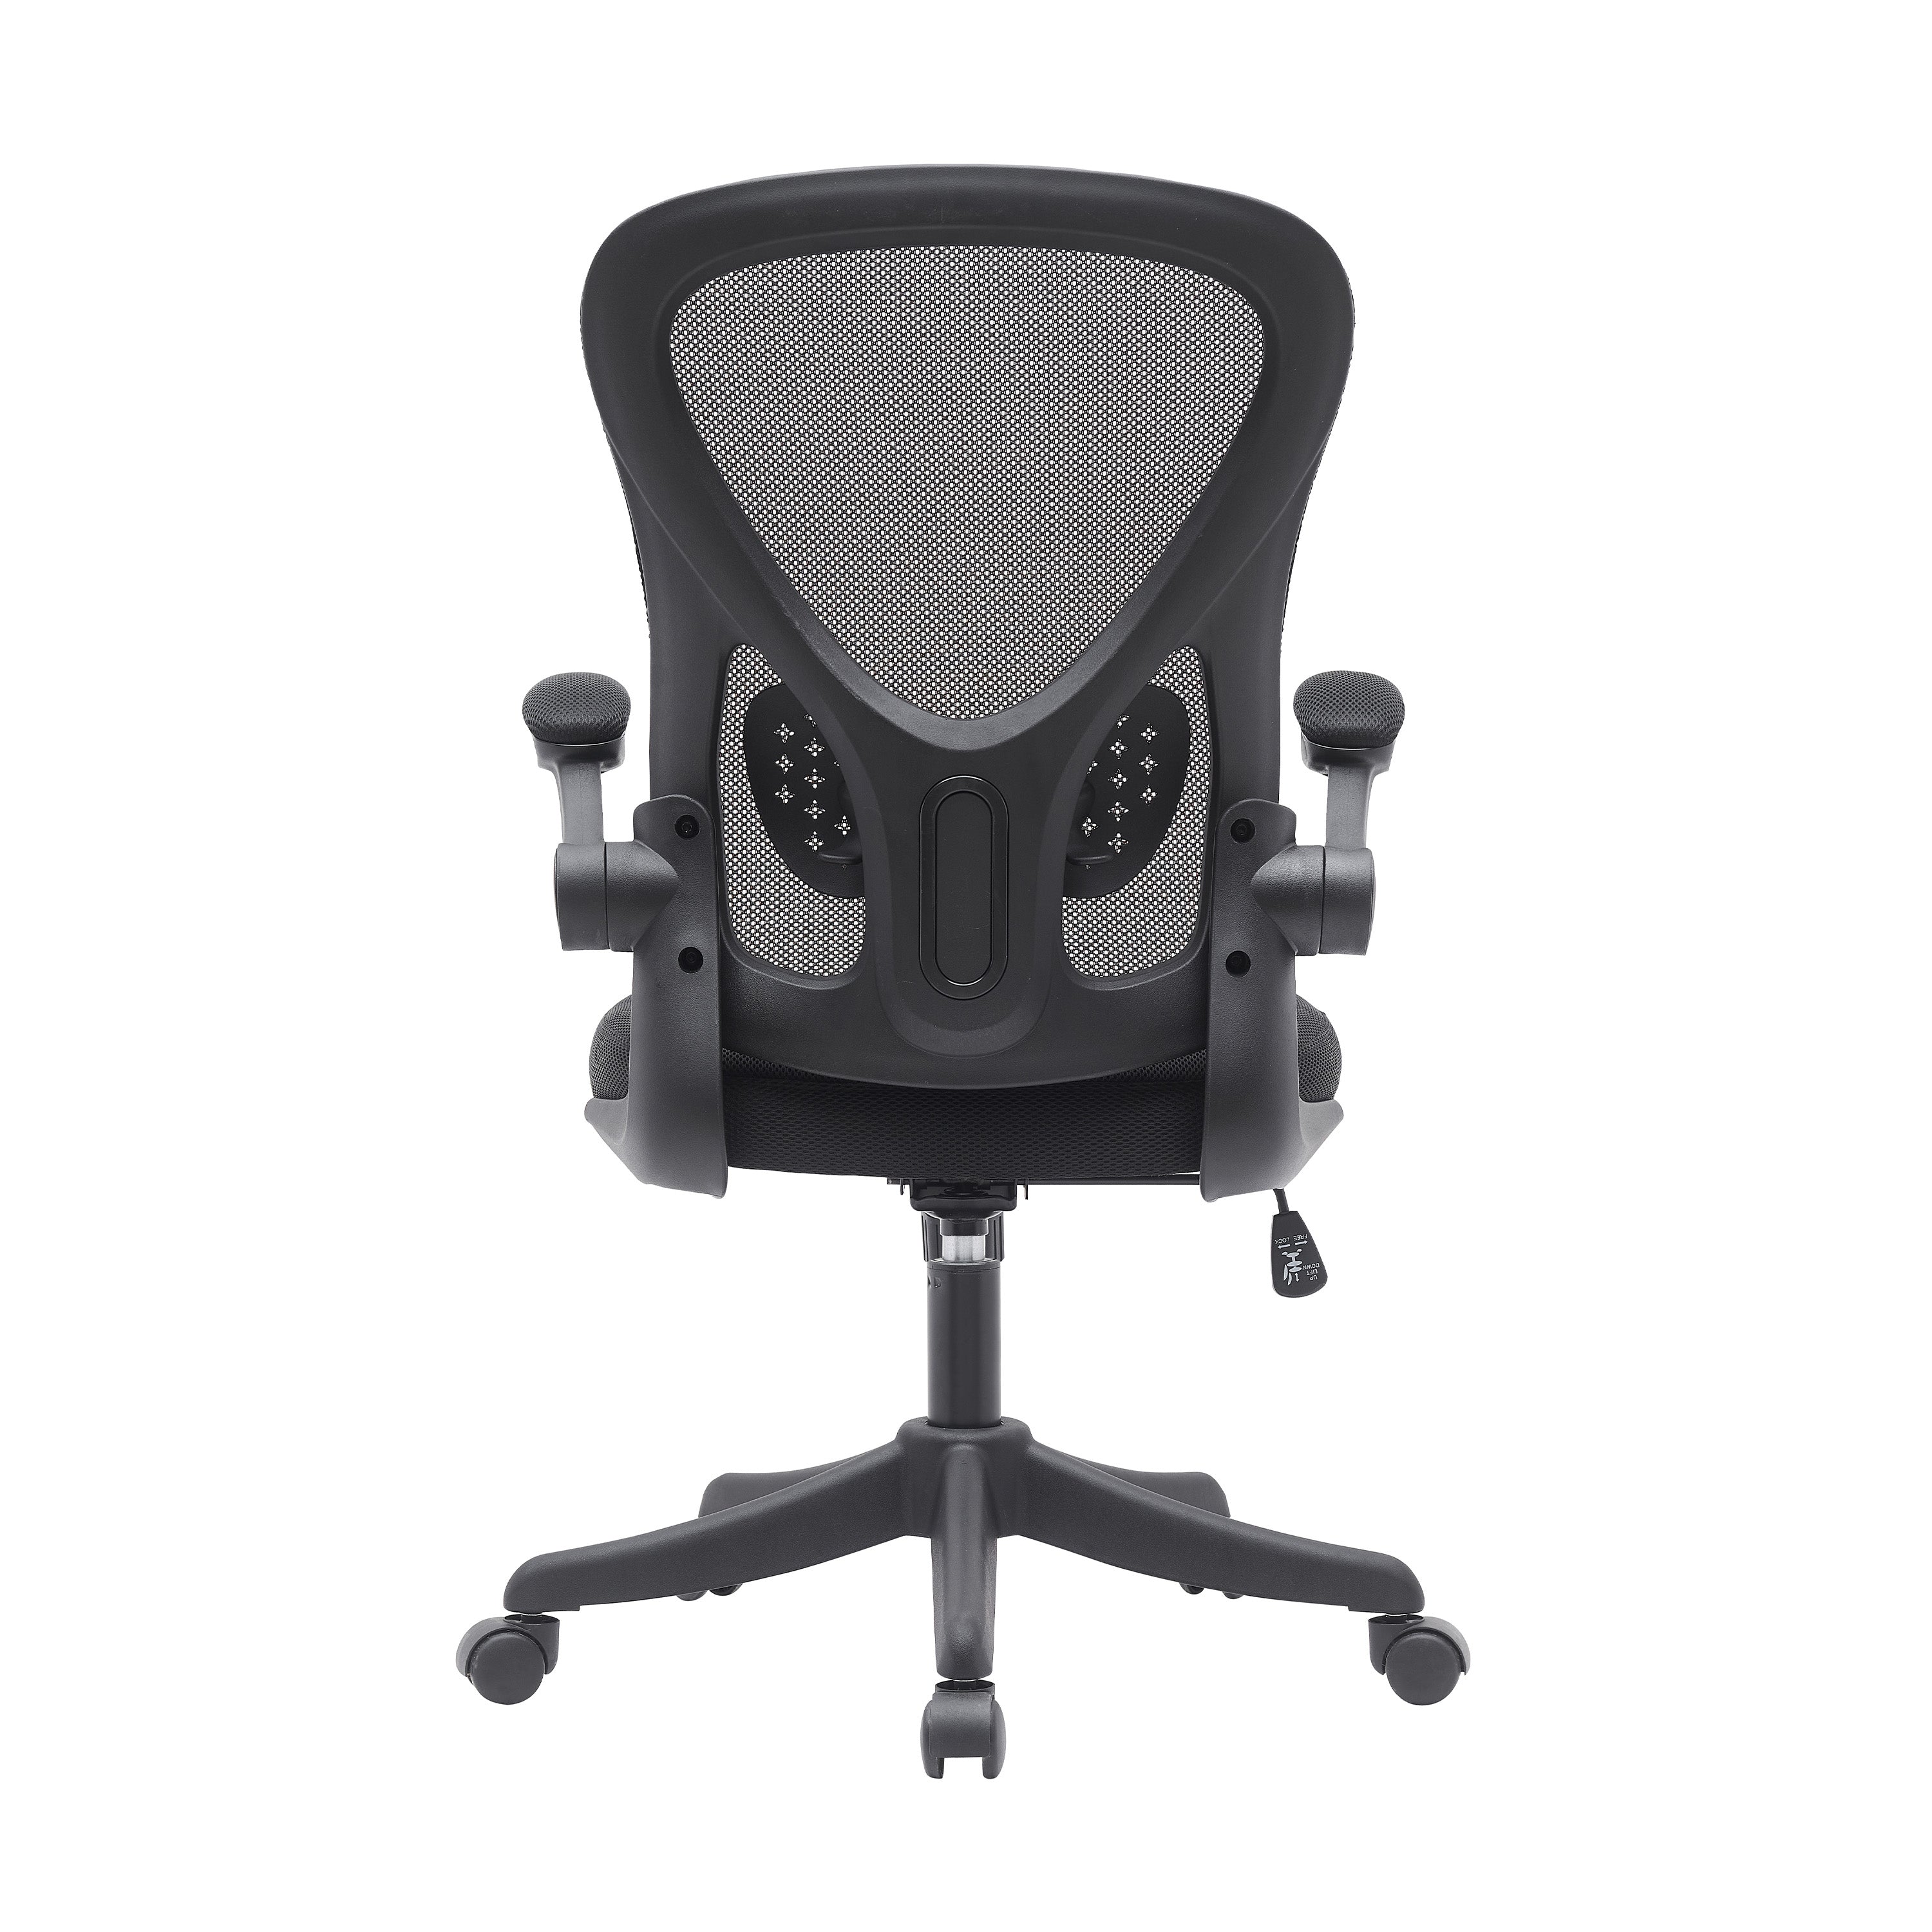 Daily Office Task Chair with Lumbar Support, Black